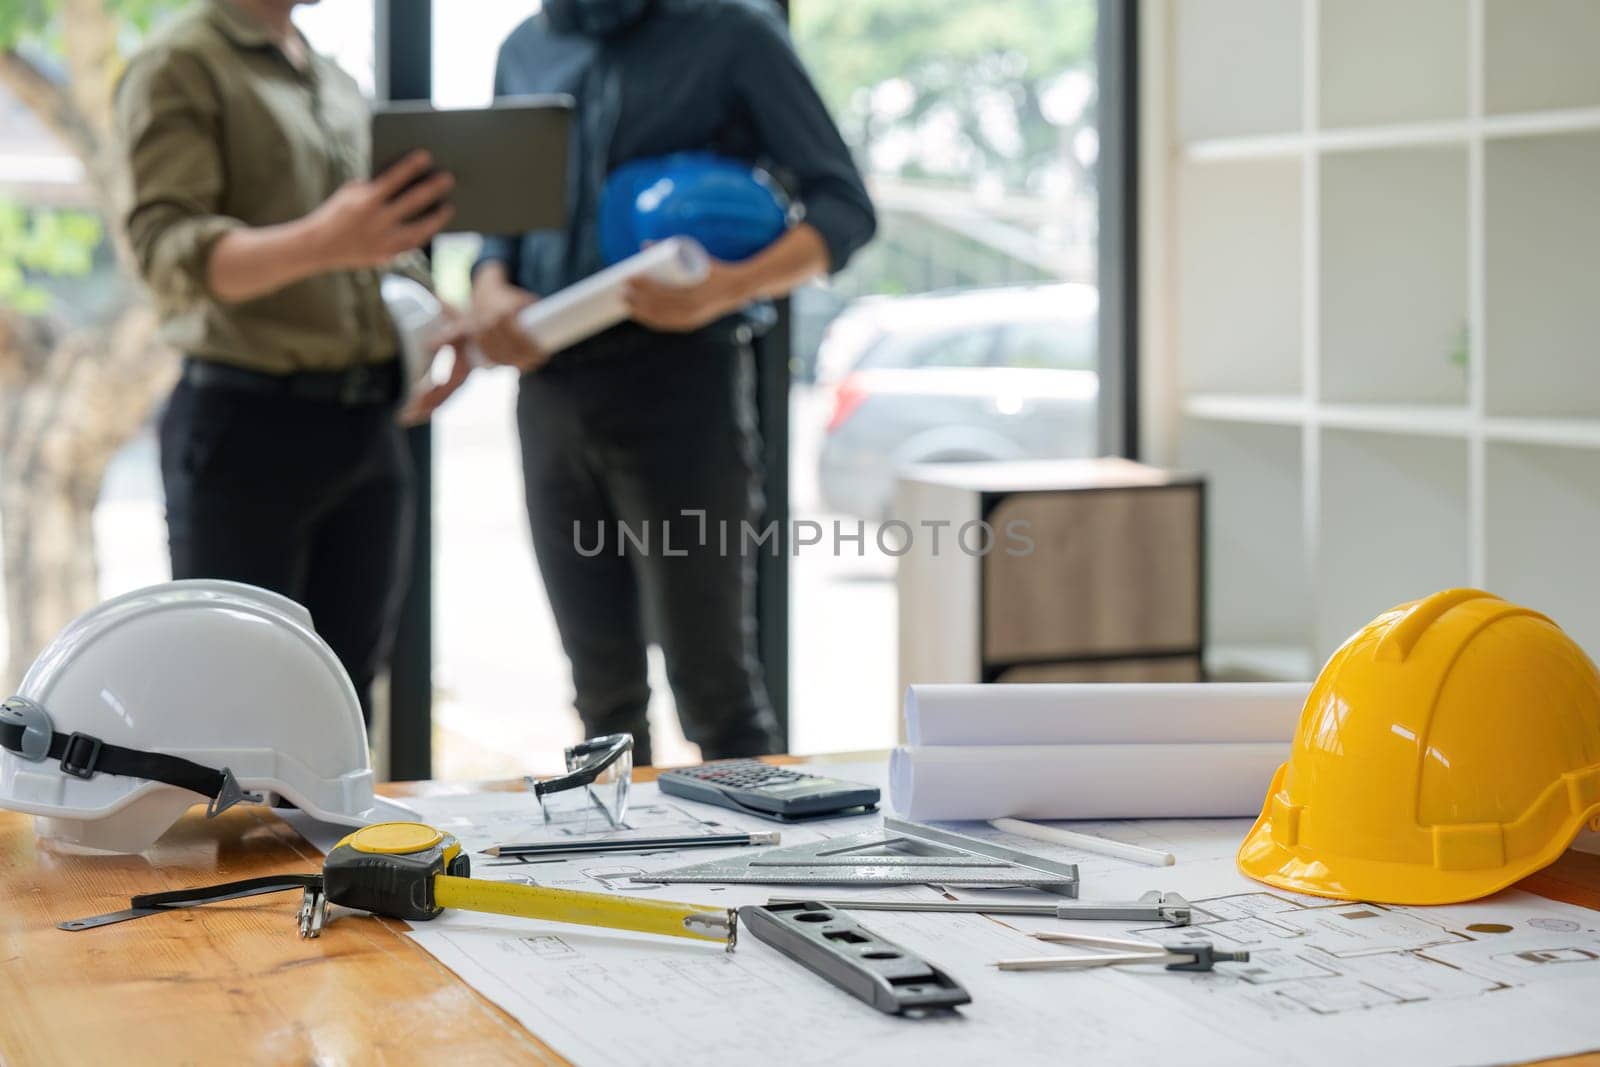 Concept of engineering equipments of protective helmet for competent engineer on piles of paper works. Blurred image of engineer working together at the desk.